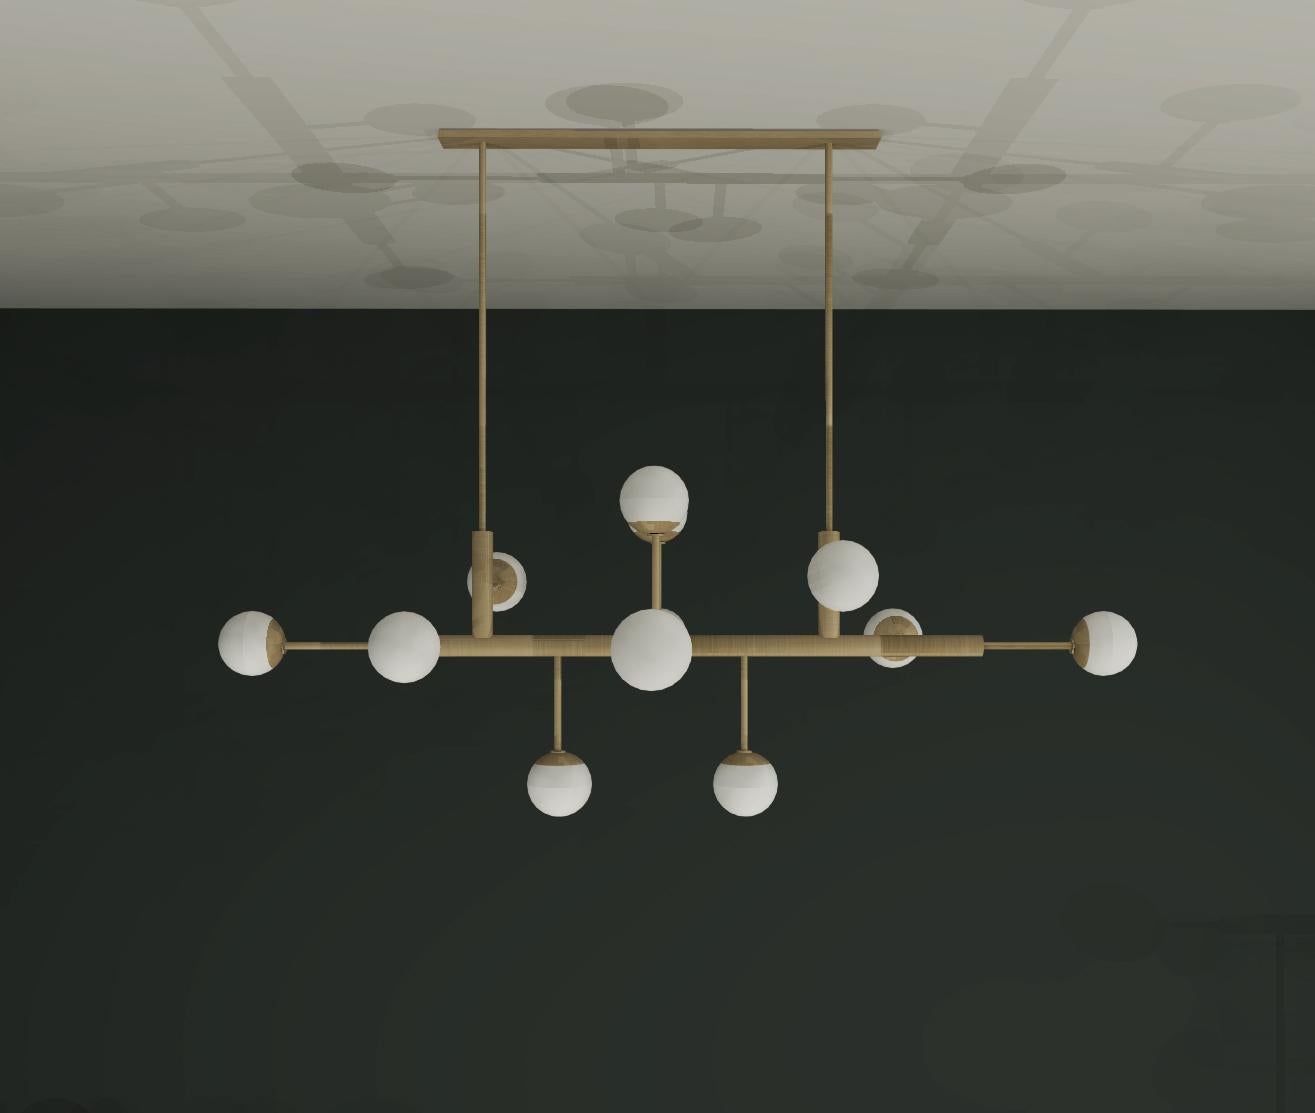 Design and crafted by world-renowned lighting brand IMAGIN, and inspired by architectural details and mid-century design, this chandelier is simple and bold. Using geometric language and limited materials, consistent, yet sophisticated compositional